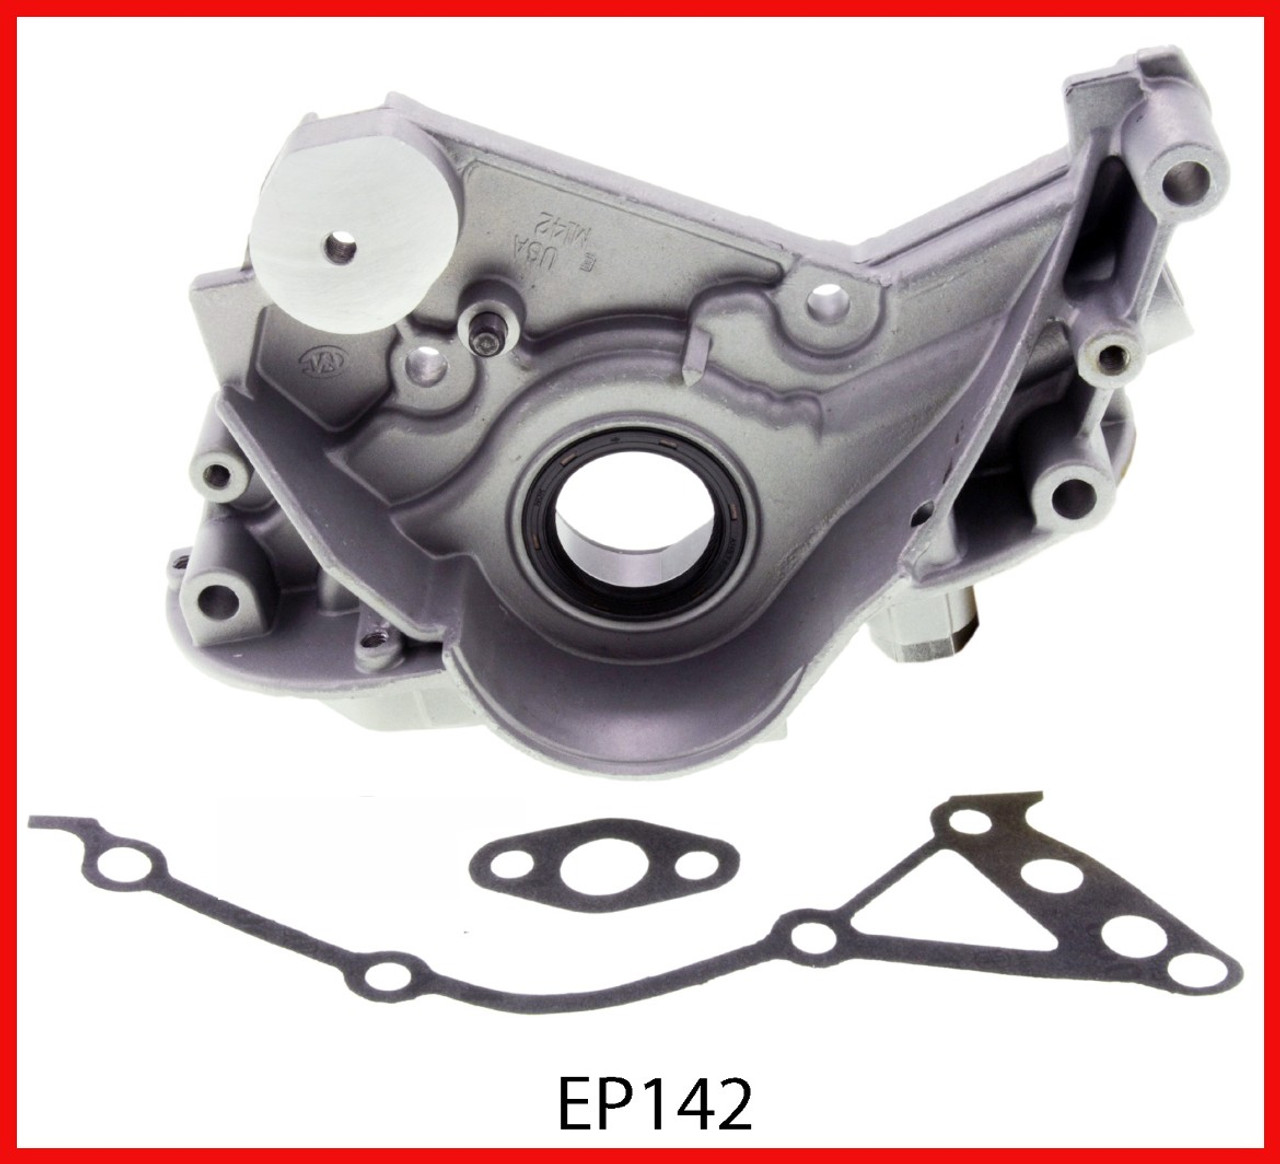 1992 Plymouth Grand Voyager 3.0L Engine Oil Pump EP142 -46